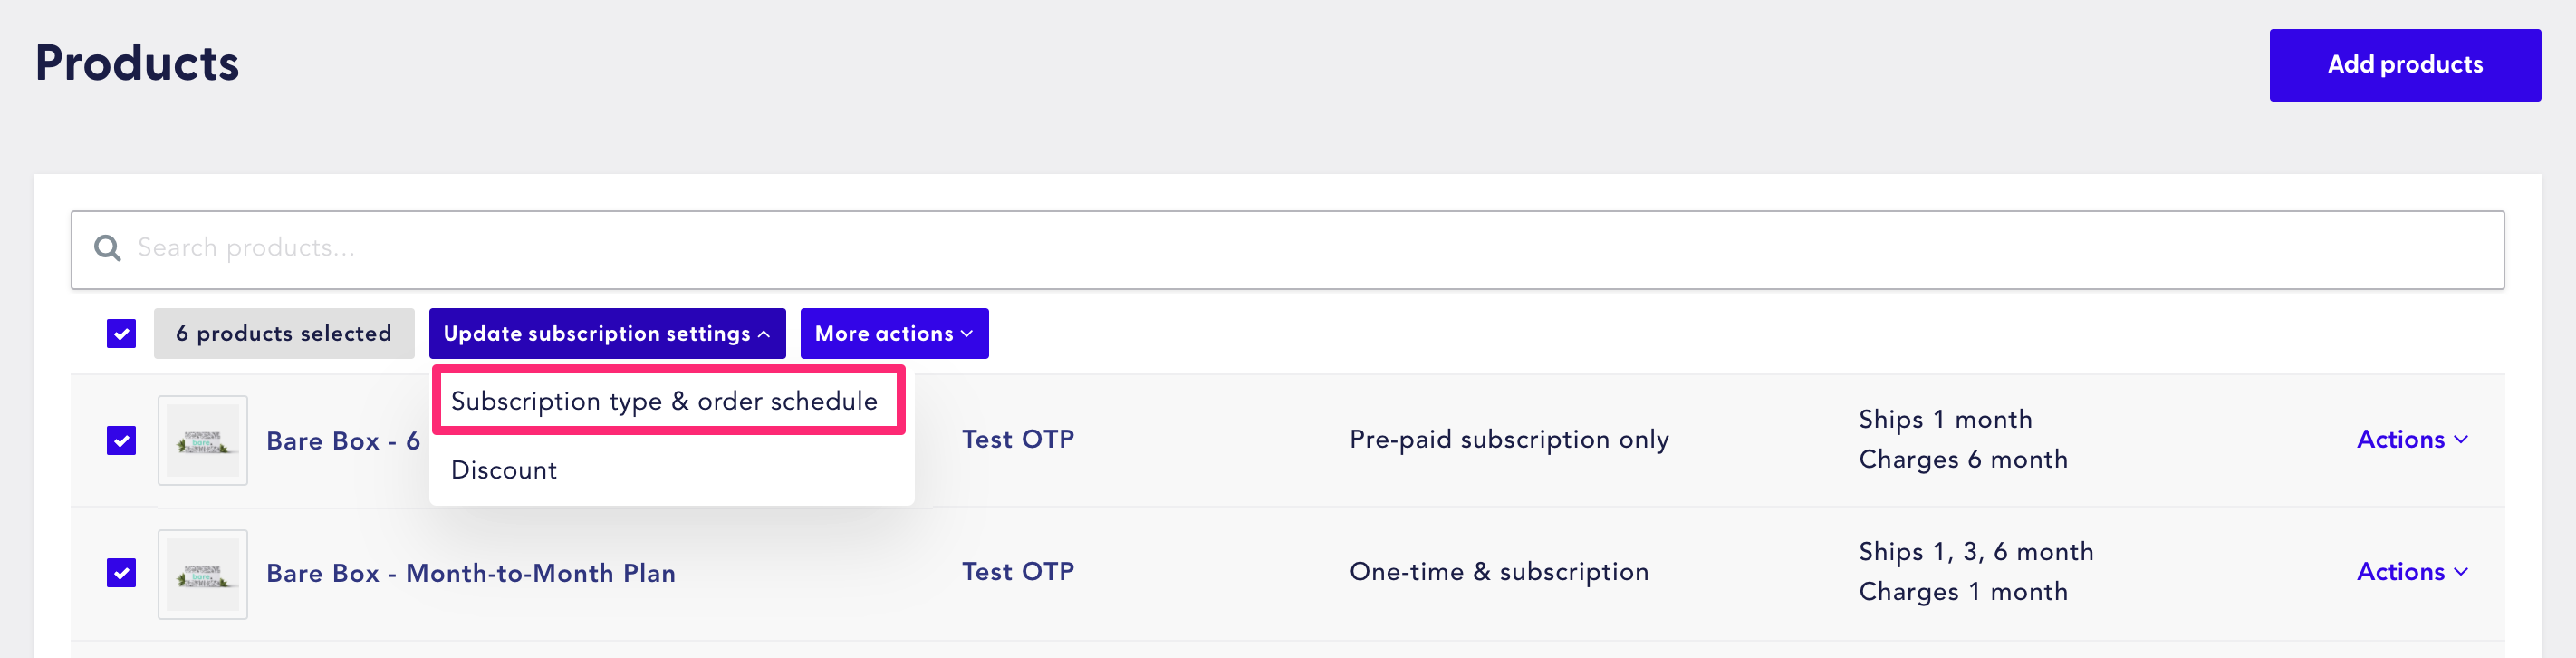 Subscription type and order schedule in bulk settings on product page